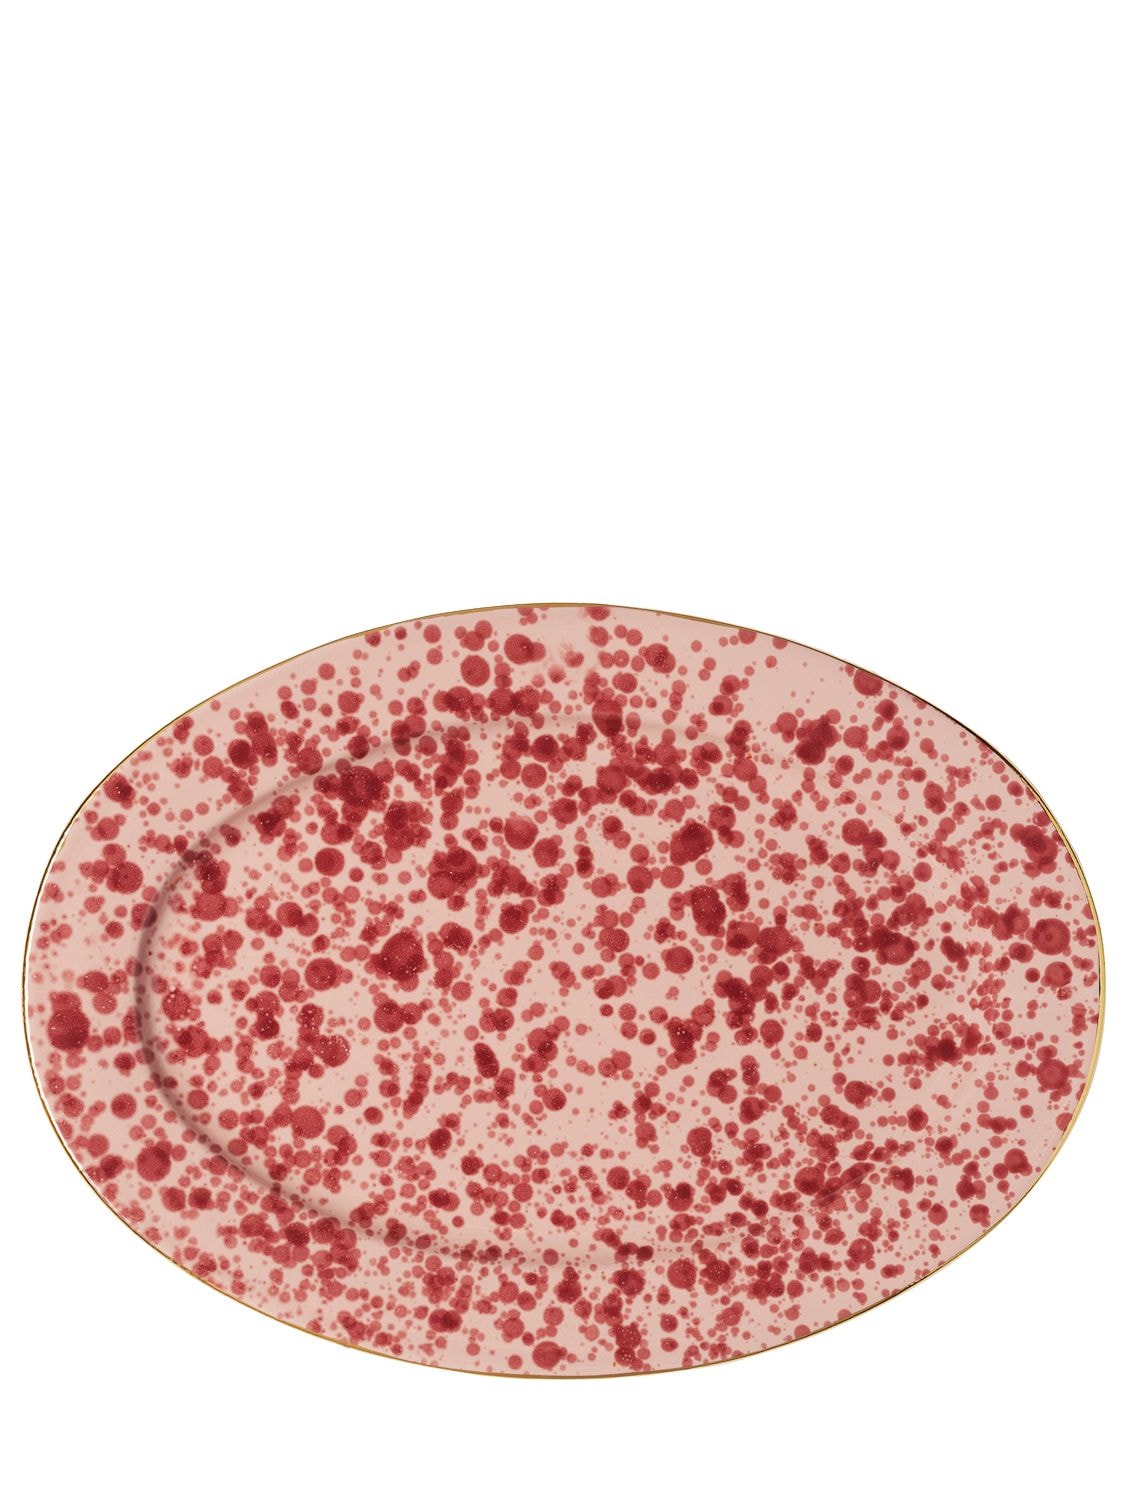 Bitossi Home Oval Tray In Pink